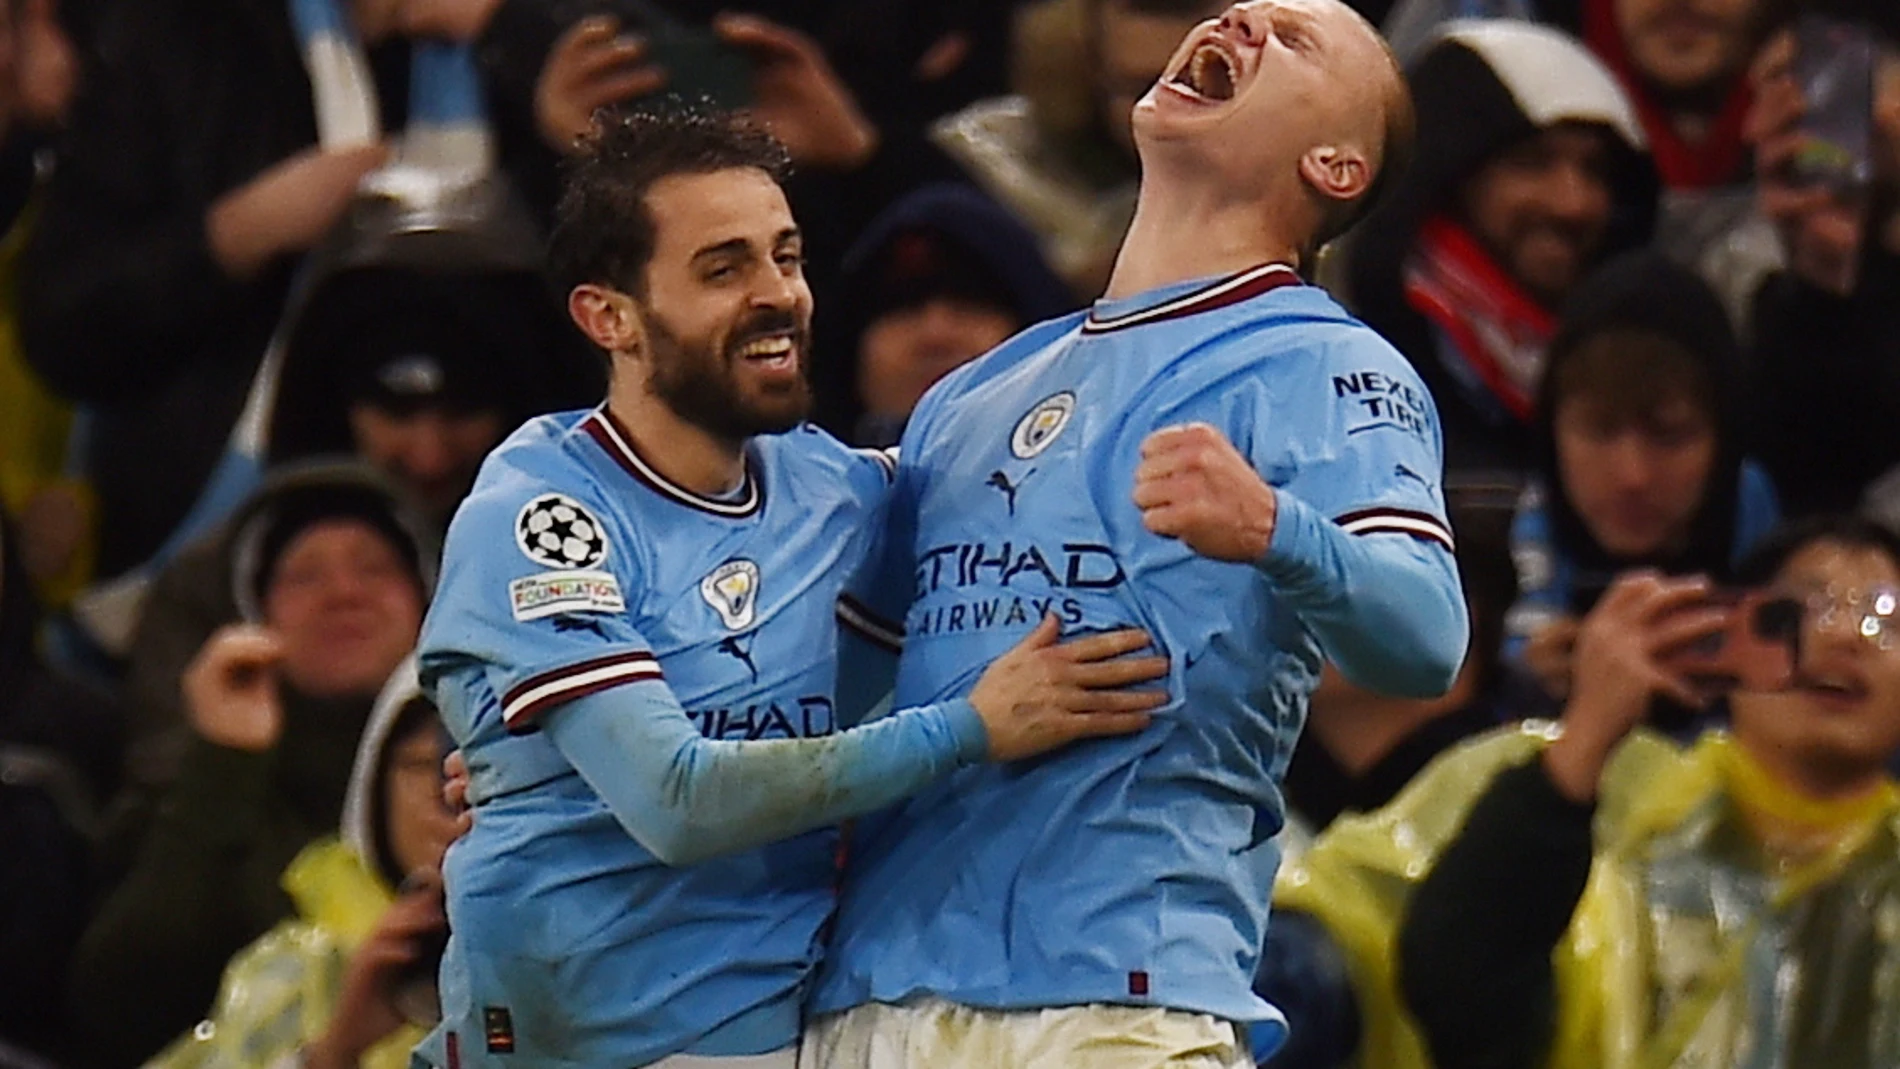 Manchester (United Kingdom), 11/04/2023.- Erling Haaland (R) of Manchester City celebrates with his teammate Bernardo Silva after scoring the 3-0 goal during the UEFA Champions League quarter final 1st leg match between Manchester City and Bayern Munich in Manchester, Britain, 11 April 2023. (Liga de Campeones, Reino Unido) EFE/EPA/PETER POWELL 